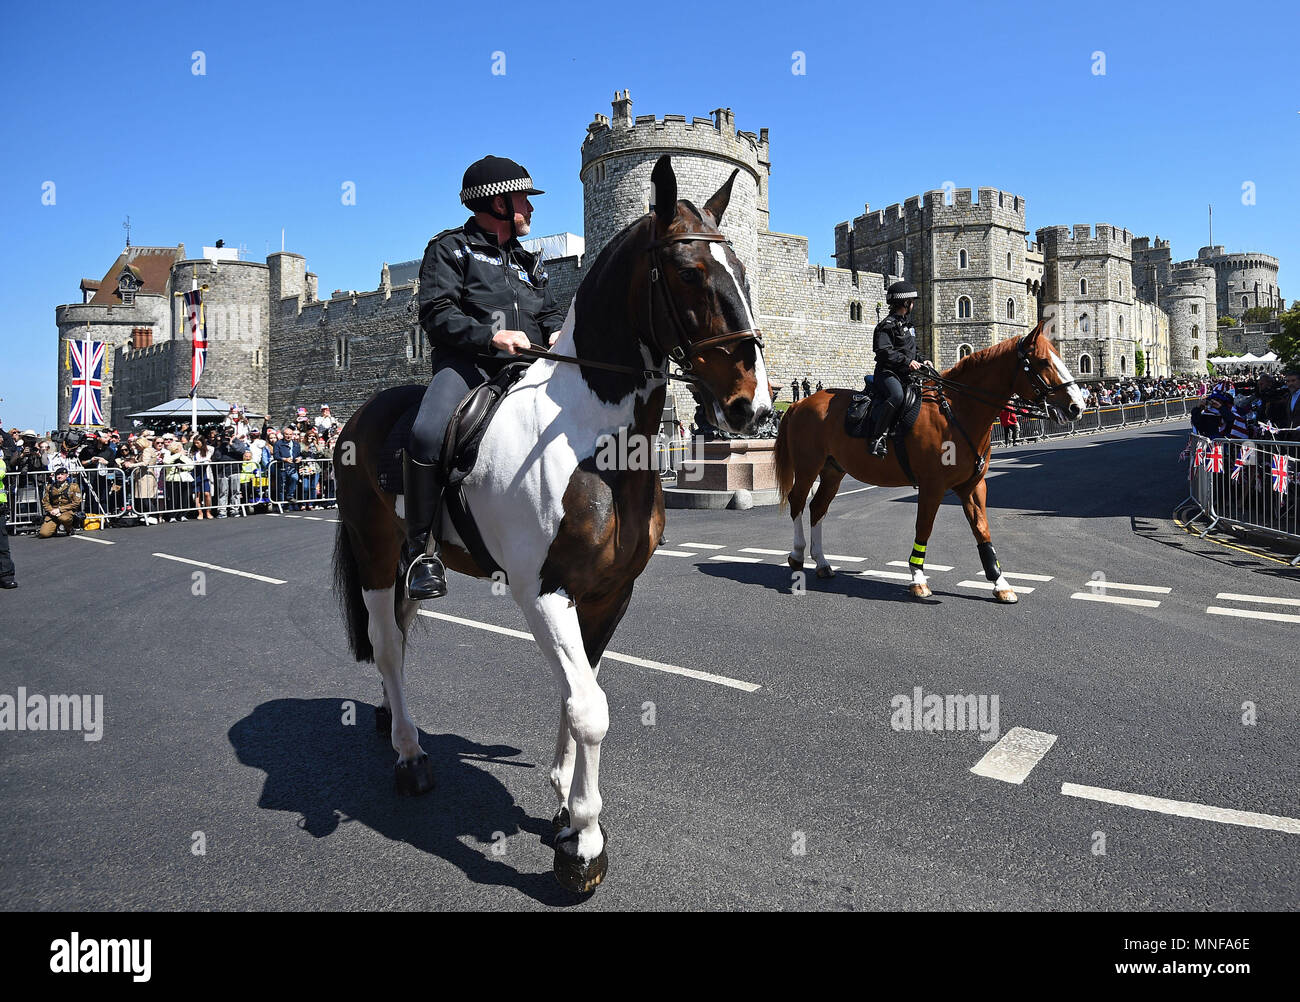 Mounted police before an armed forces parade rehearsal in Windsor, Berkshire ahead of the wedding of Prince Harry and Meghan Markle this weekend. Stock Photo